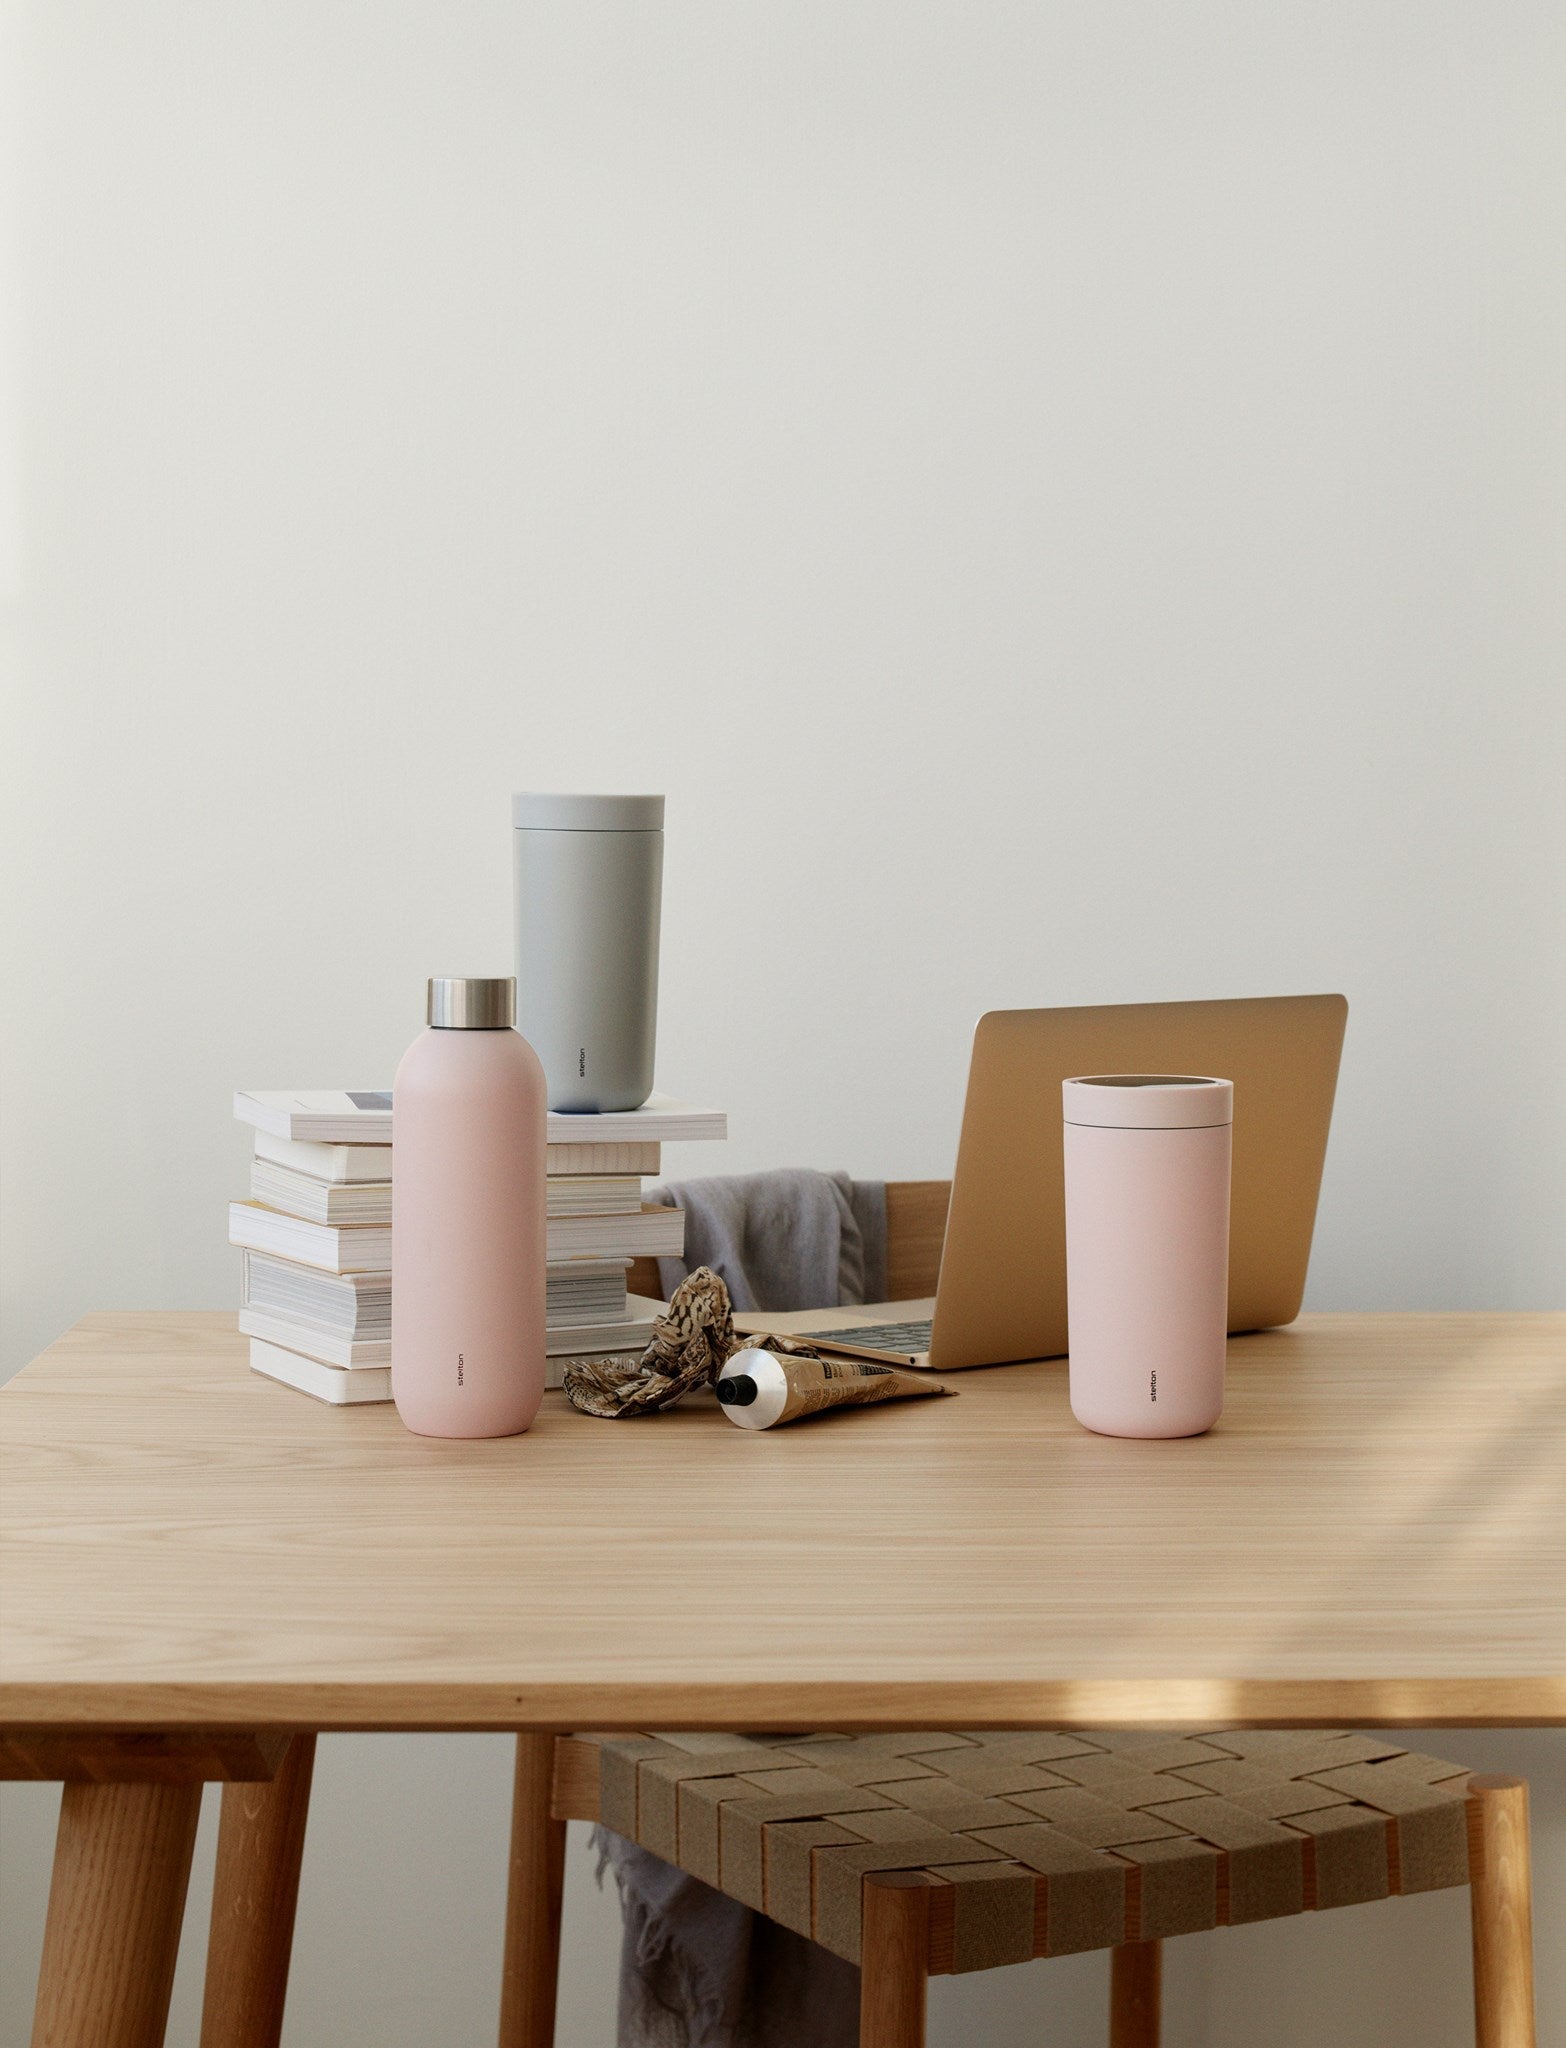 Stelton To Go Click Thermobecher 0,4 L, Soft Light Grey